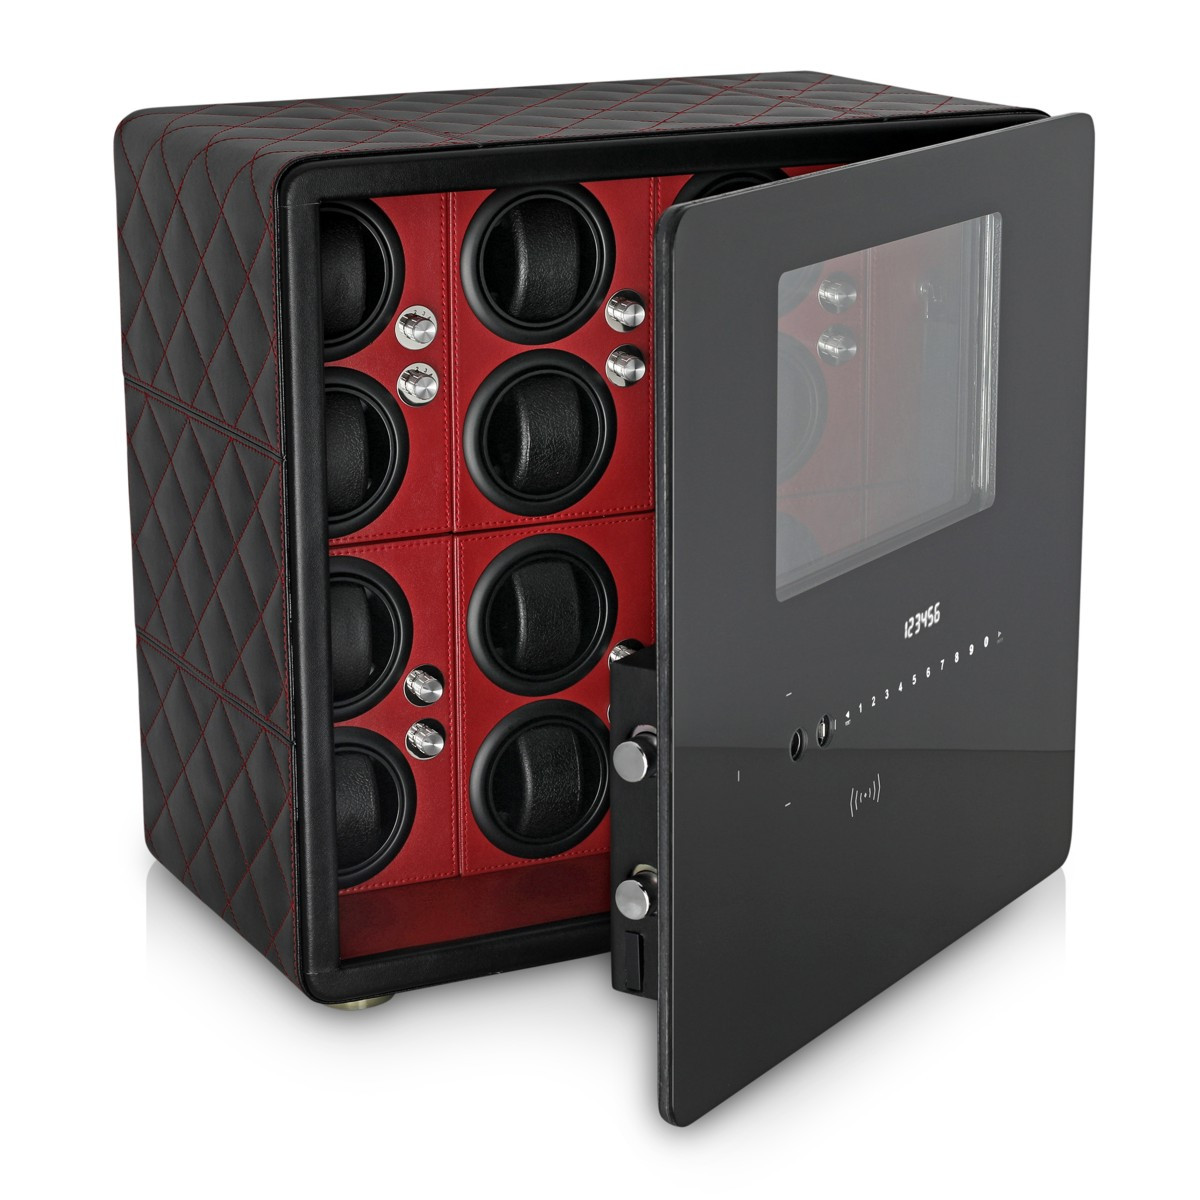 Watch Winder Safe QN-12BR-SPU for 12 Watches with Digital Lock, Alarm